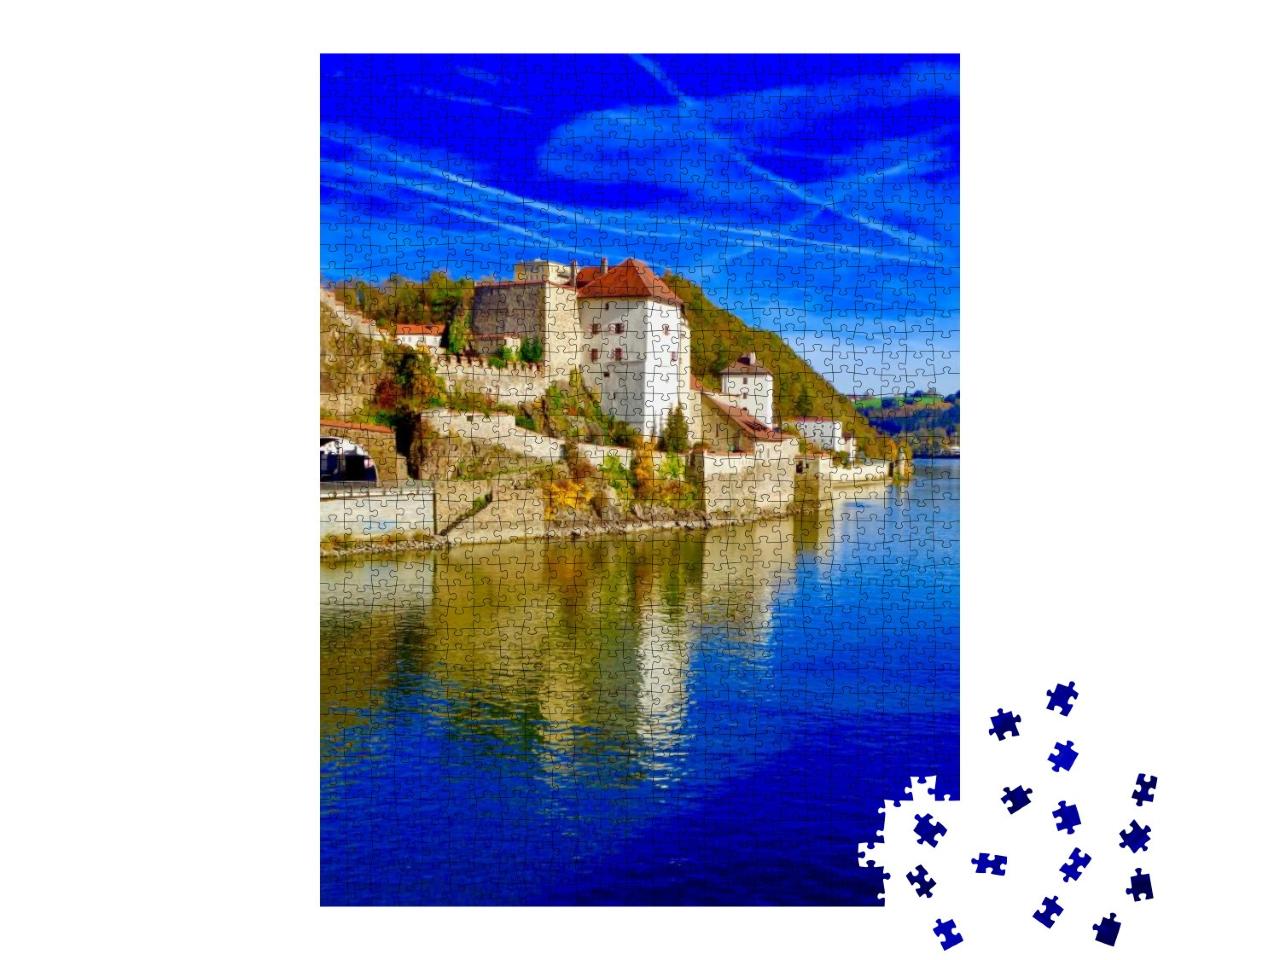 Passau, Germany Downtown Area Along the Danube River. the... Jigsaw Puzzle with 1000 pieces